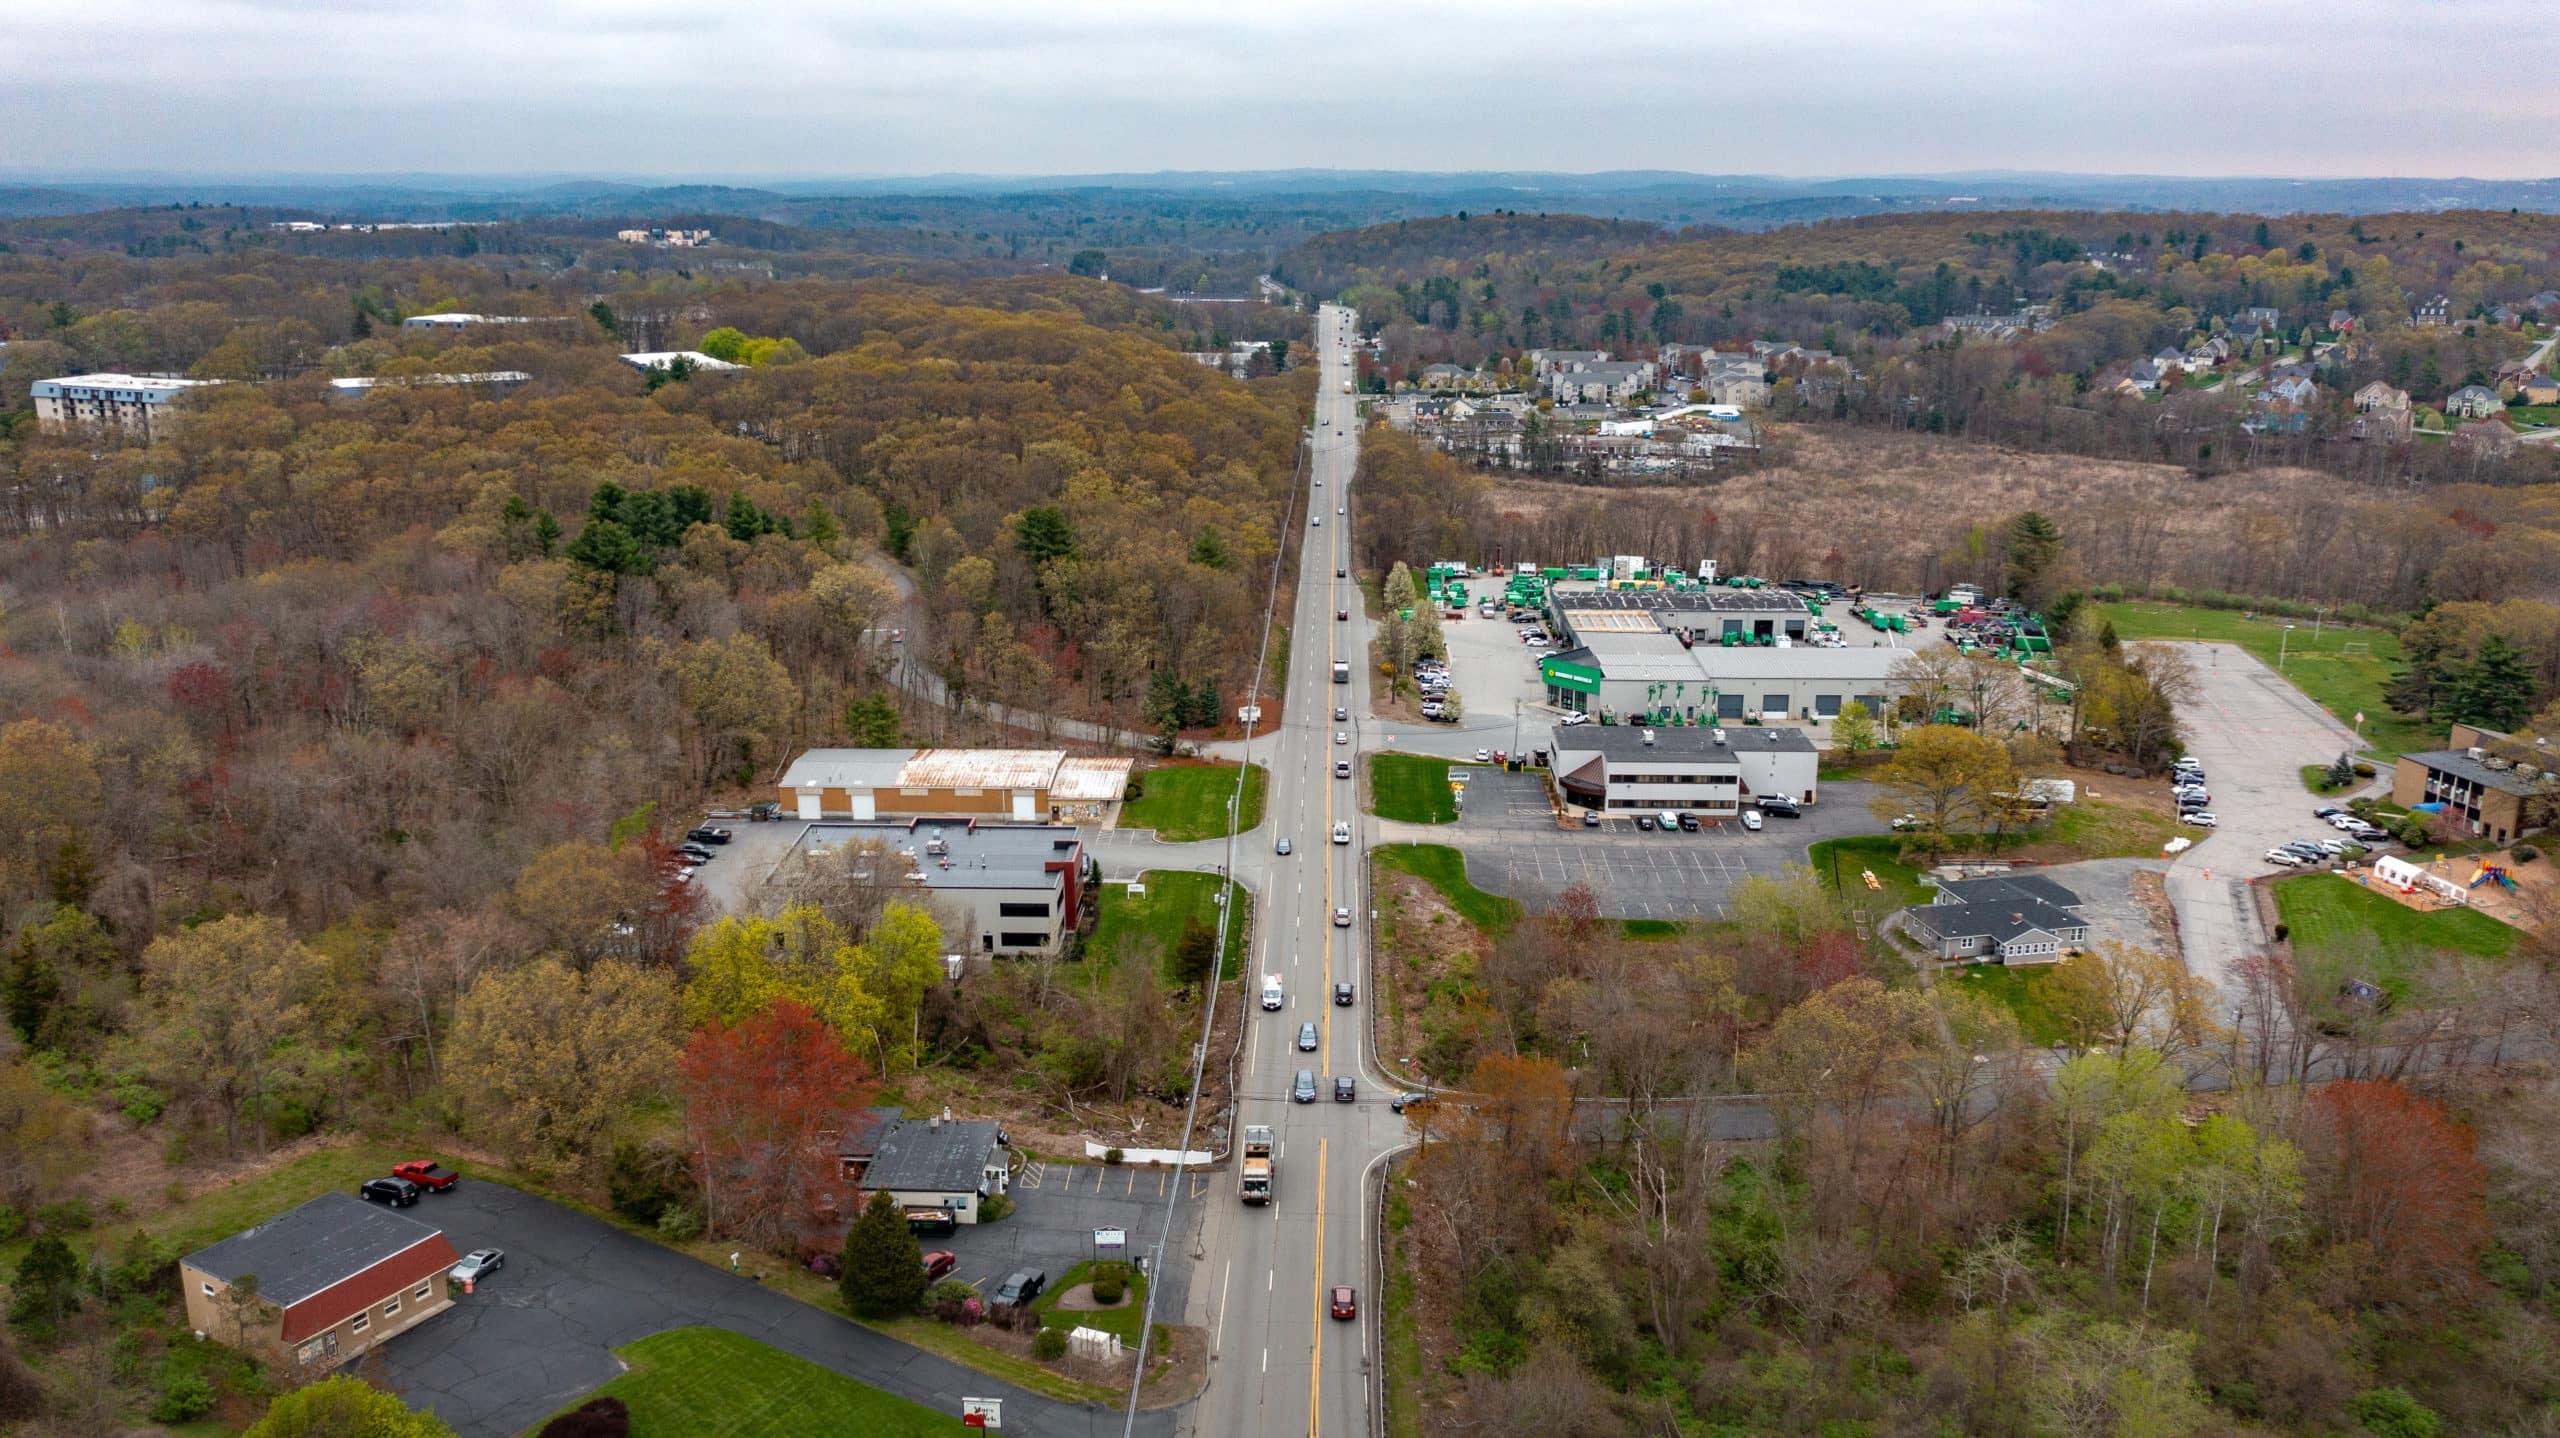 Shrewsbury seeks federal funding for Route 20 safety improvements